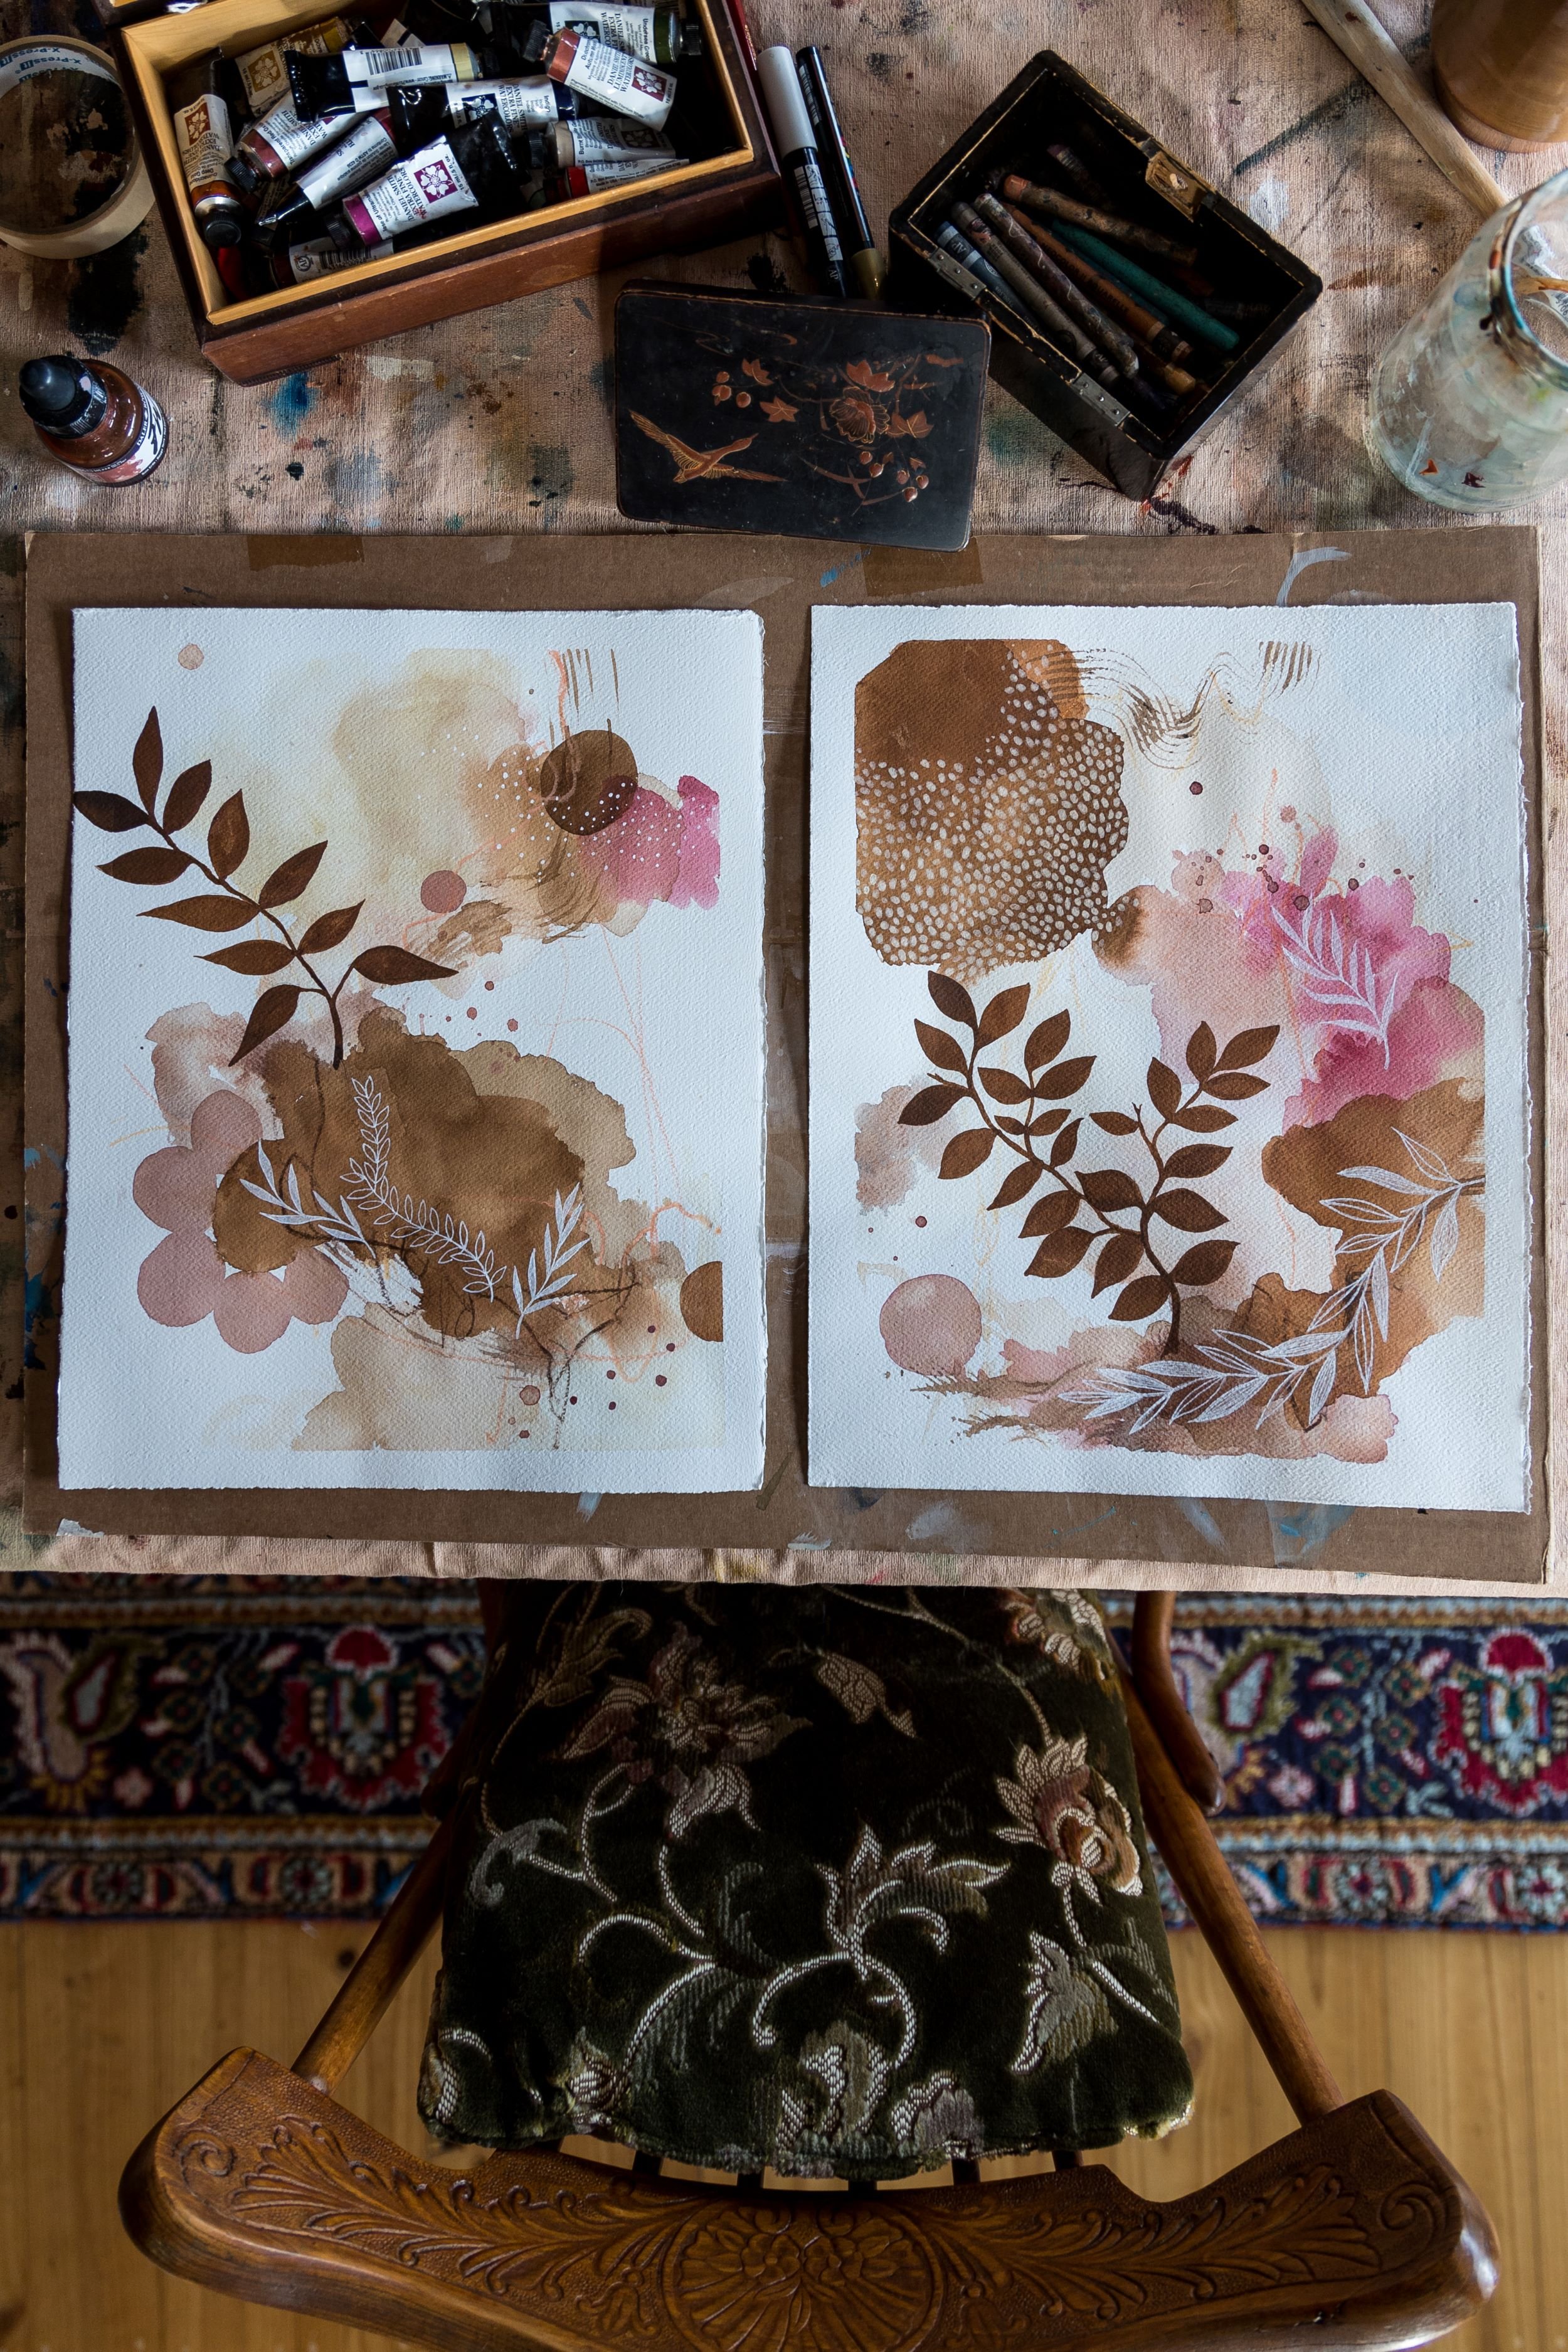  Bird’s eye view of artist Laura Horn’s table with two watercolour paintings on it. The paintings are close to completion.  